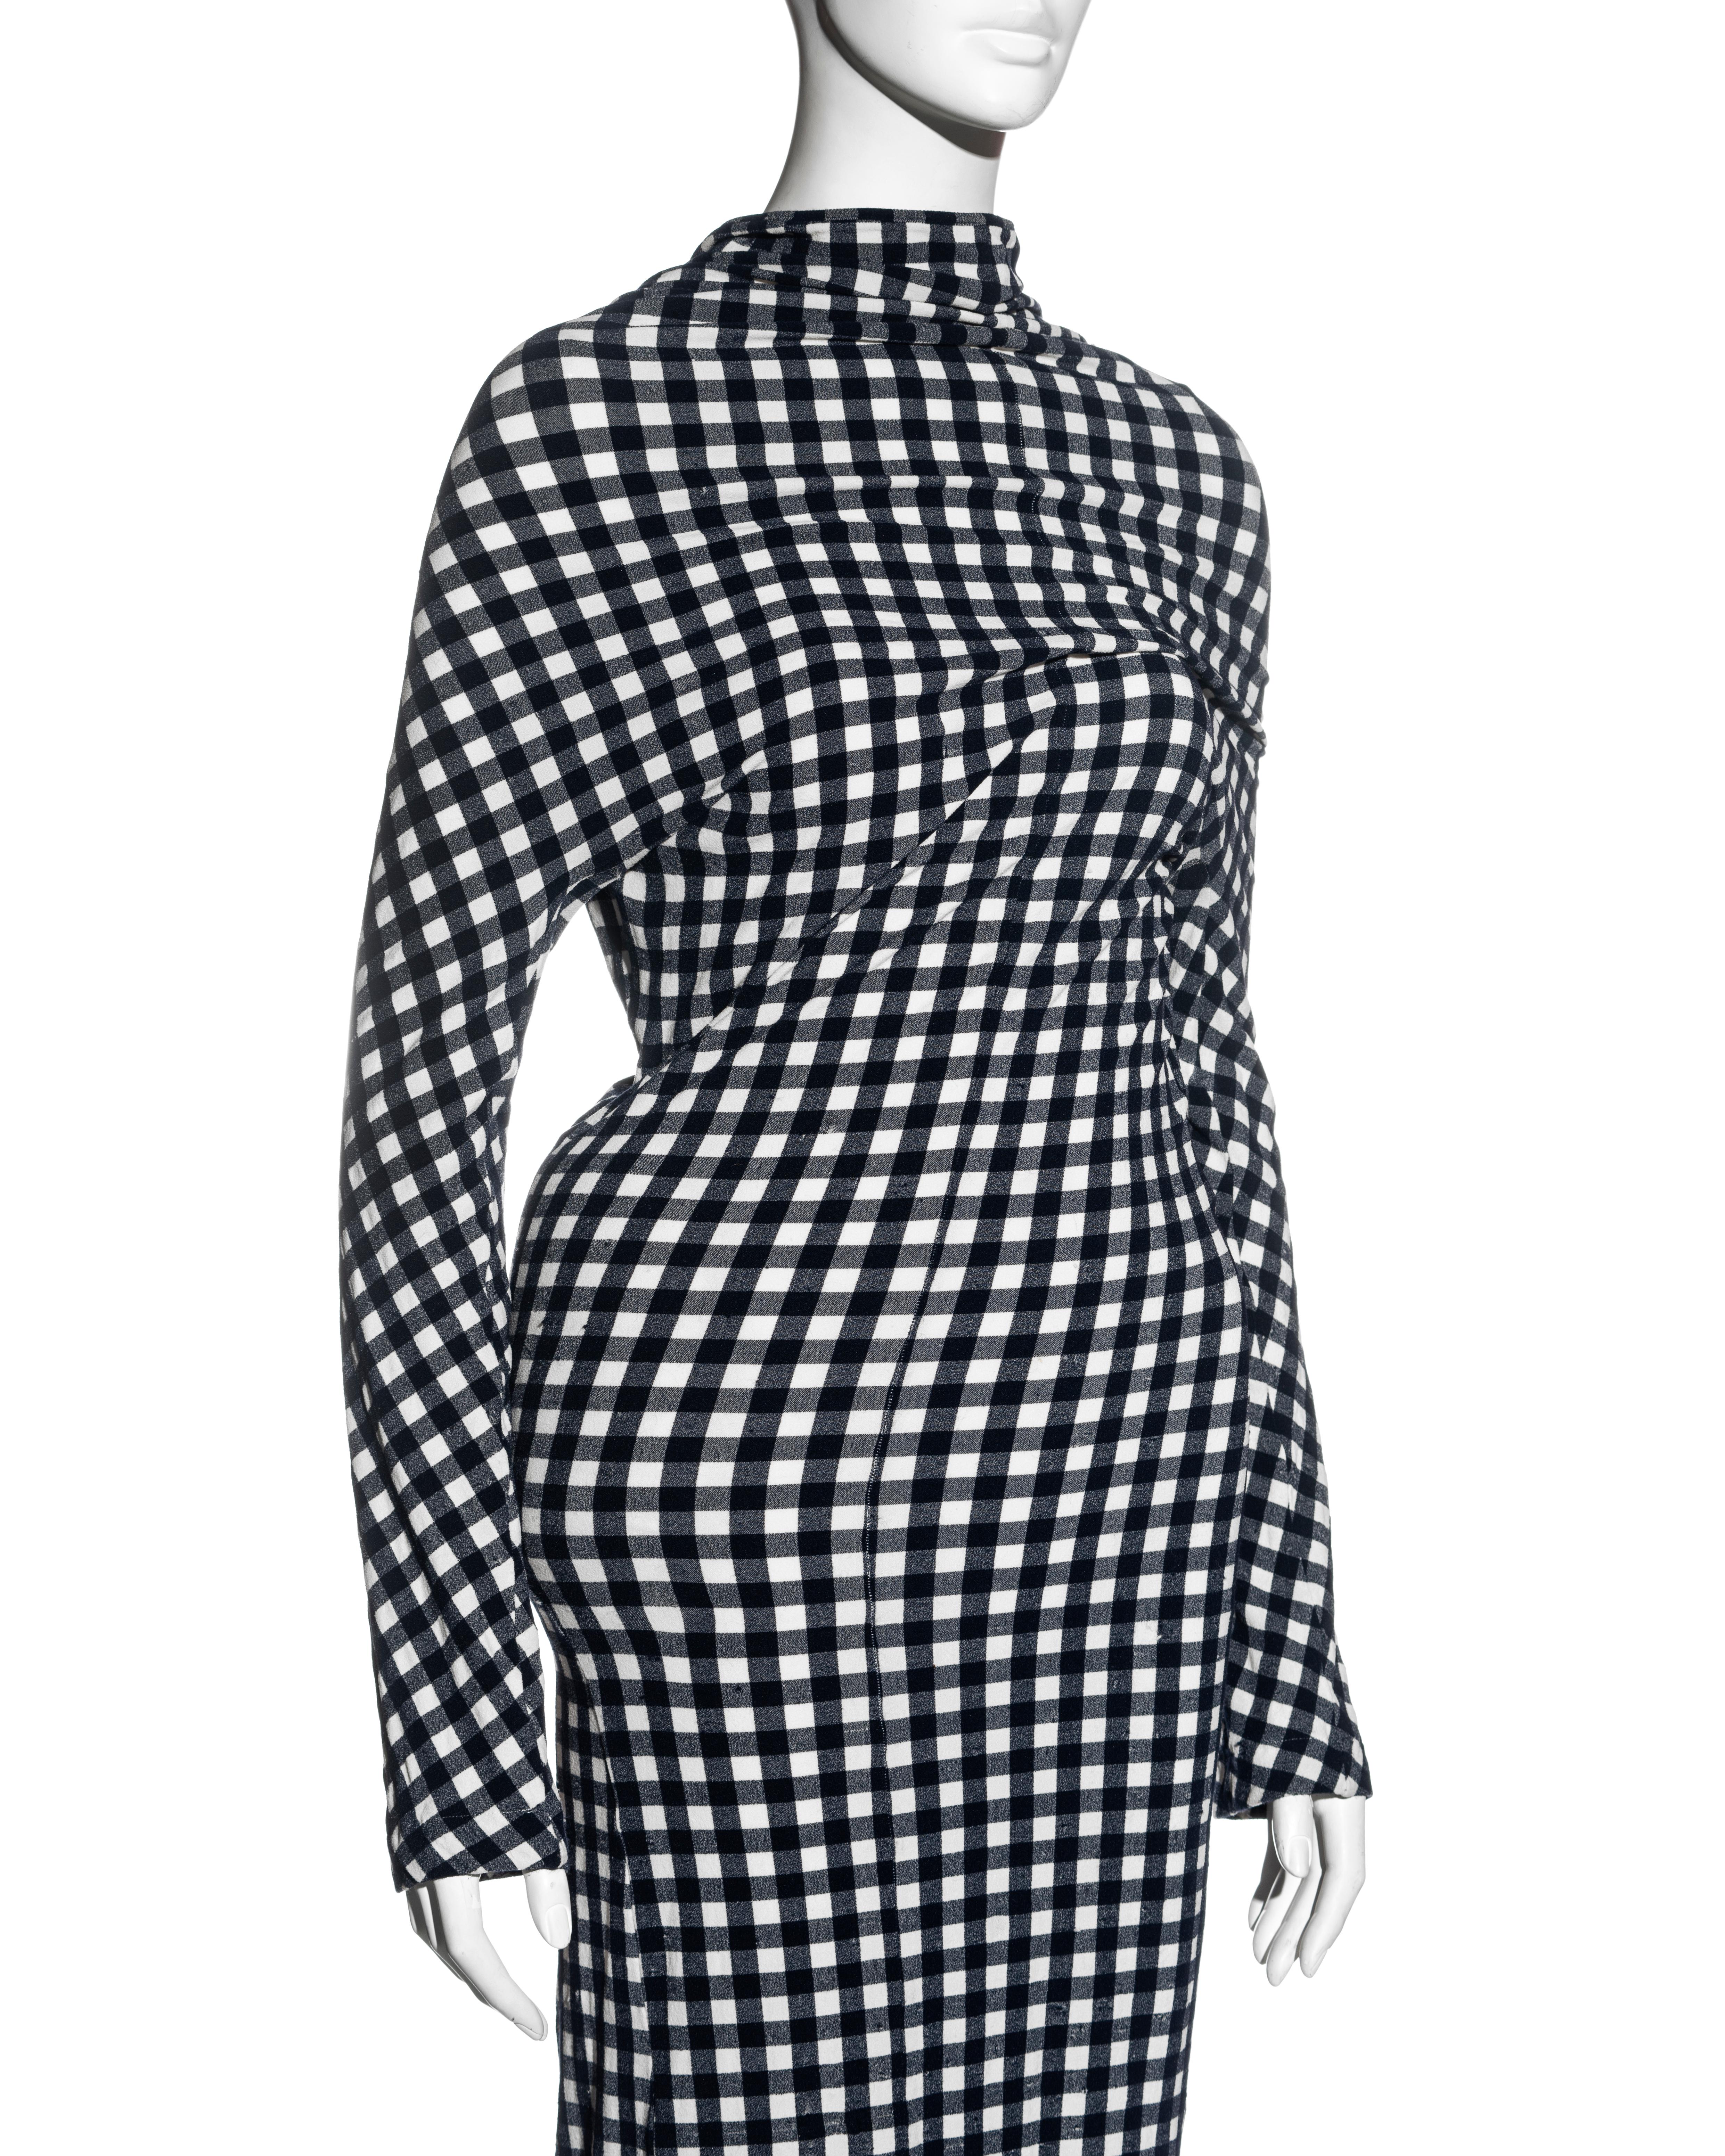 Comme des Garcons navy and white gingham 2-piece dress with pillows, ss 1997 2